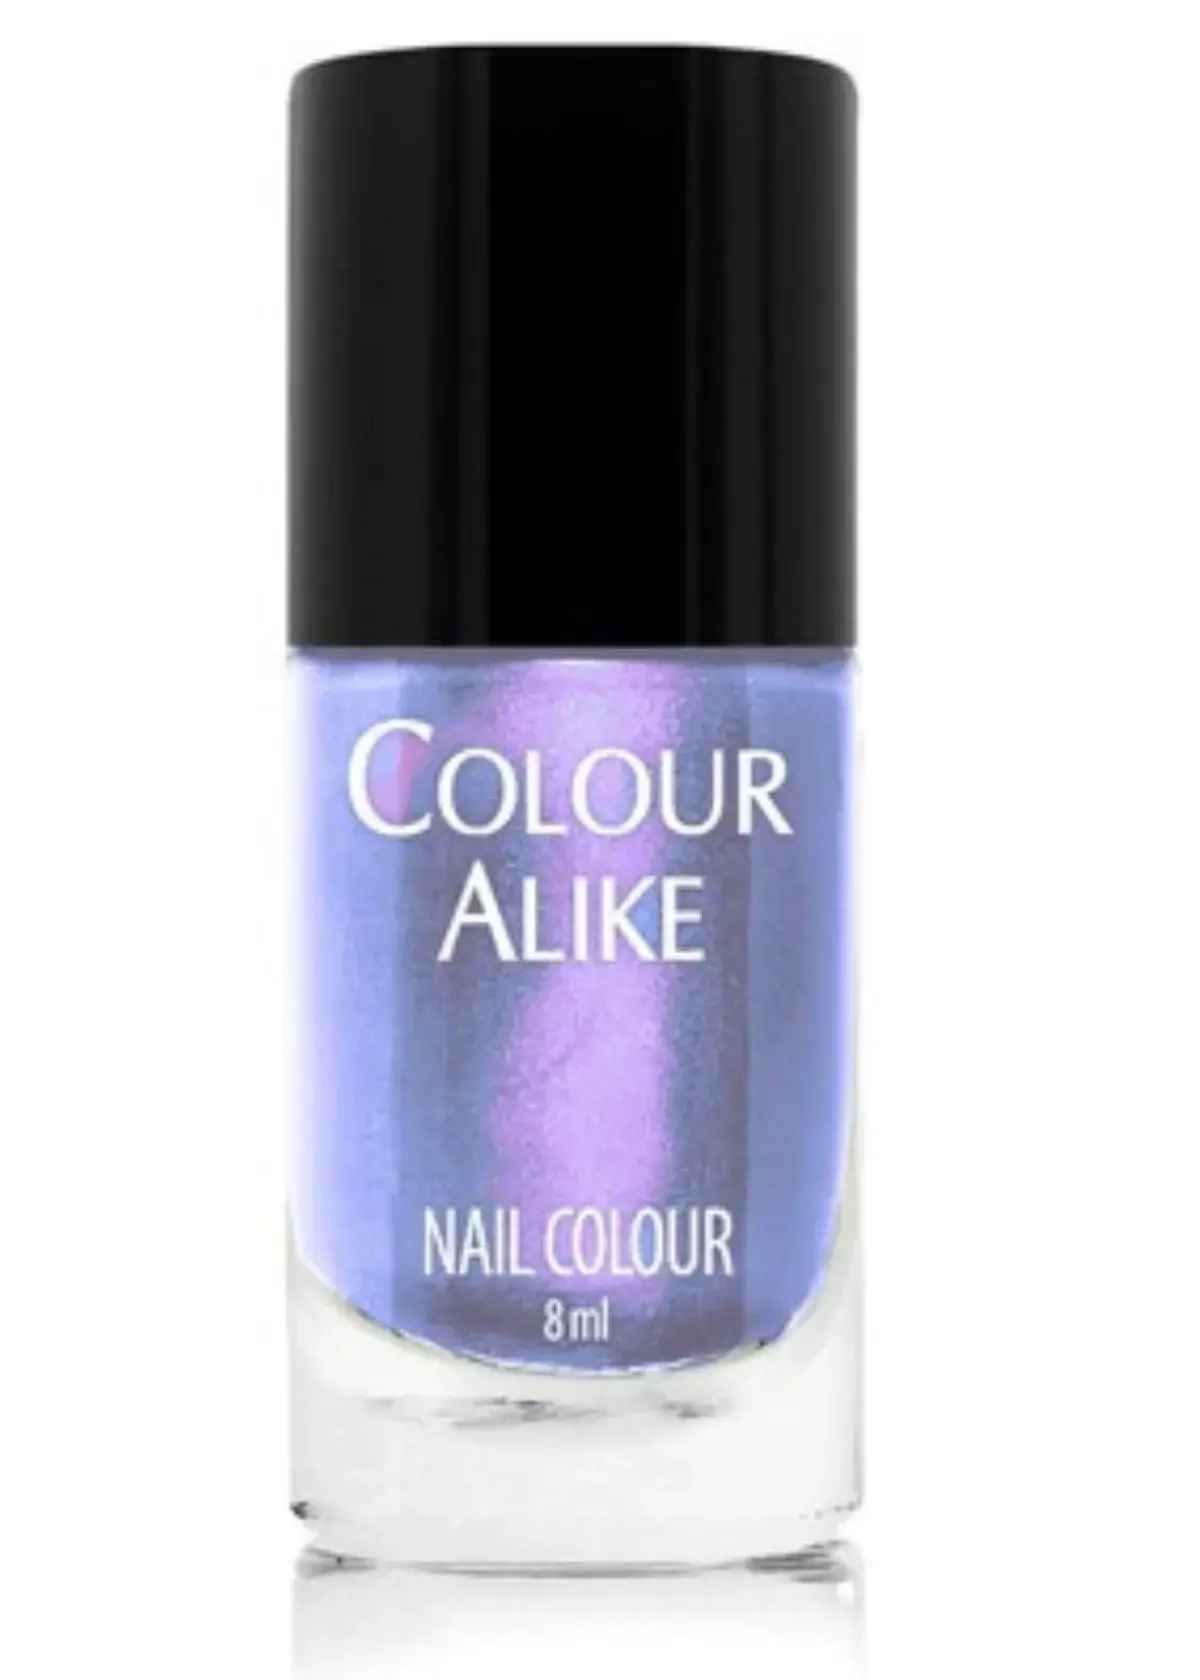 How to choose the right holographic nail polish?